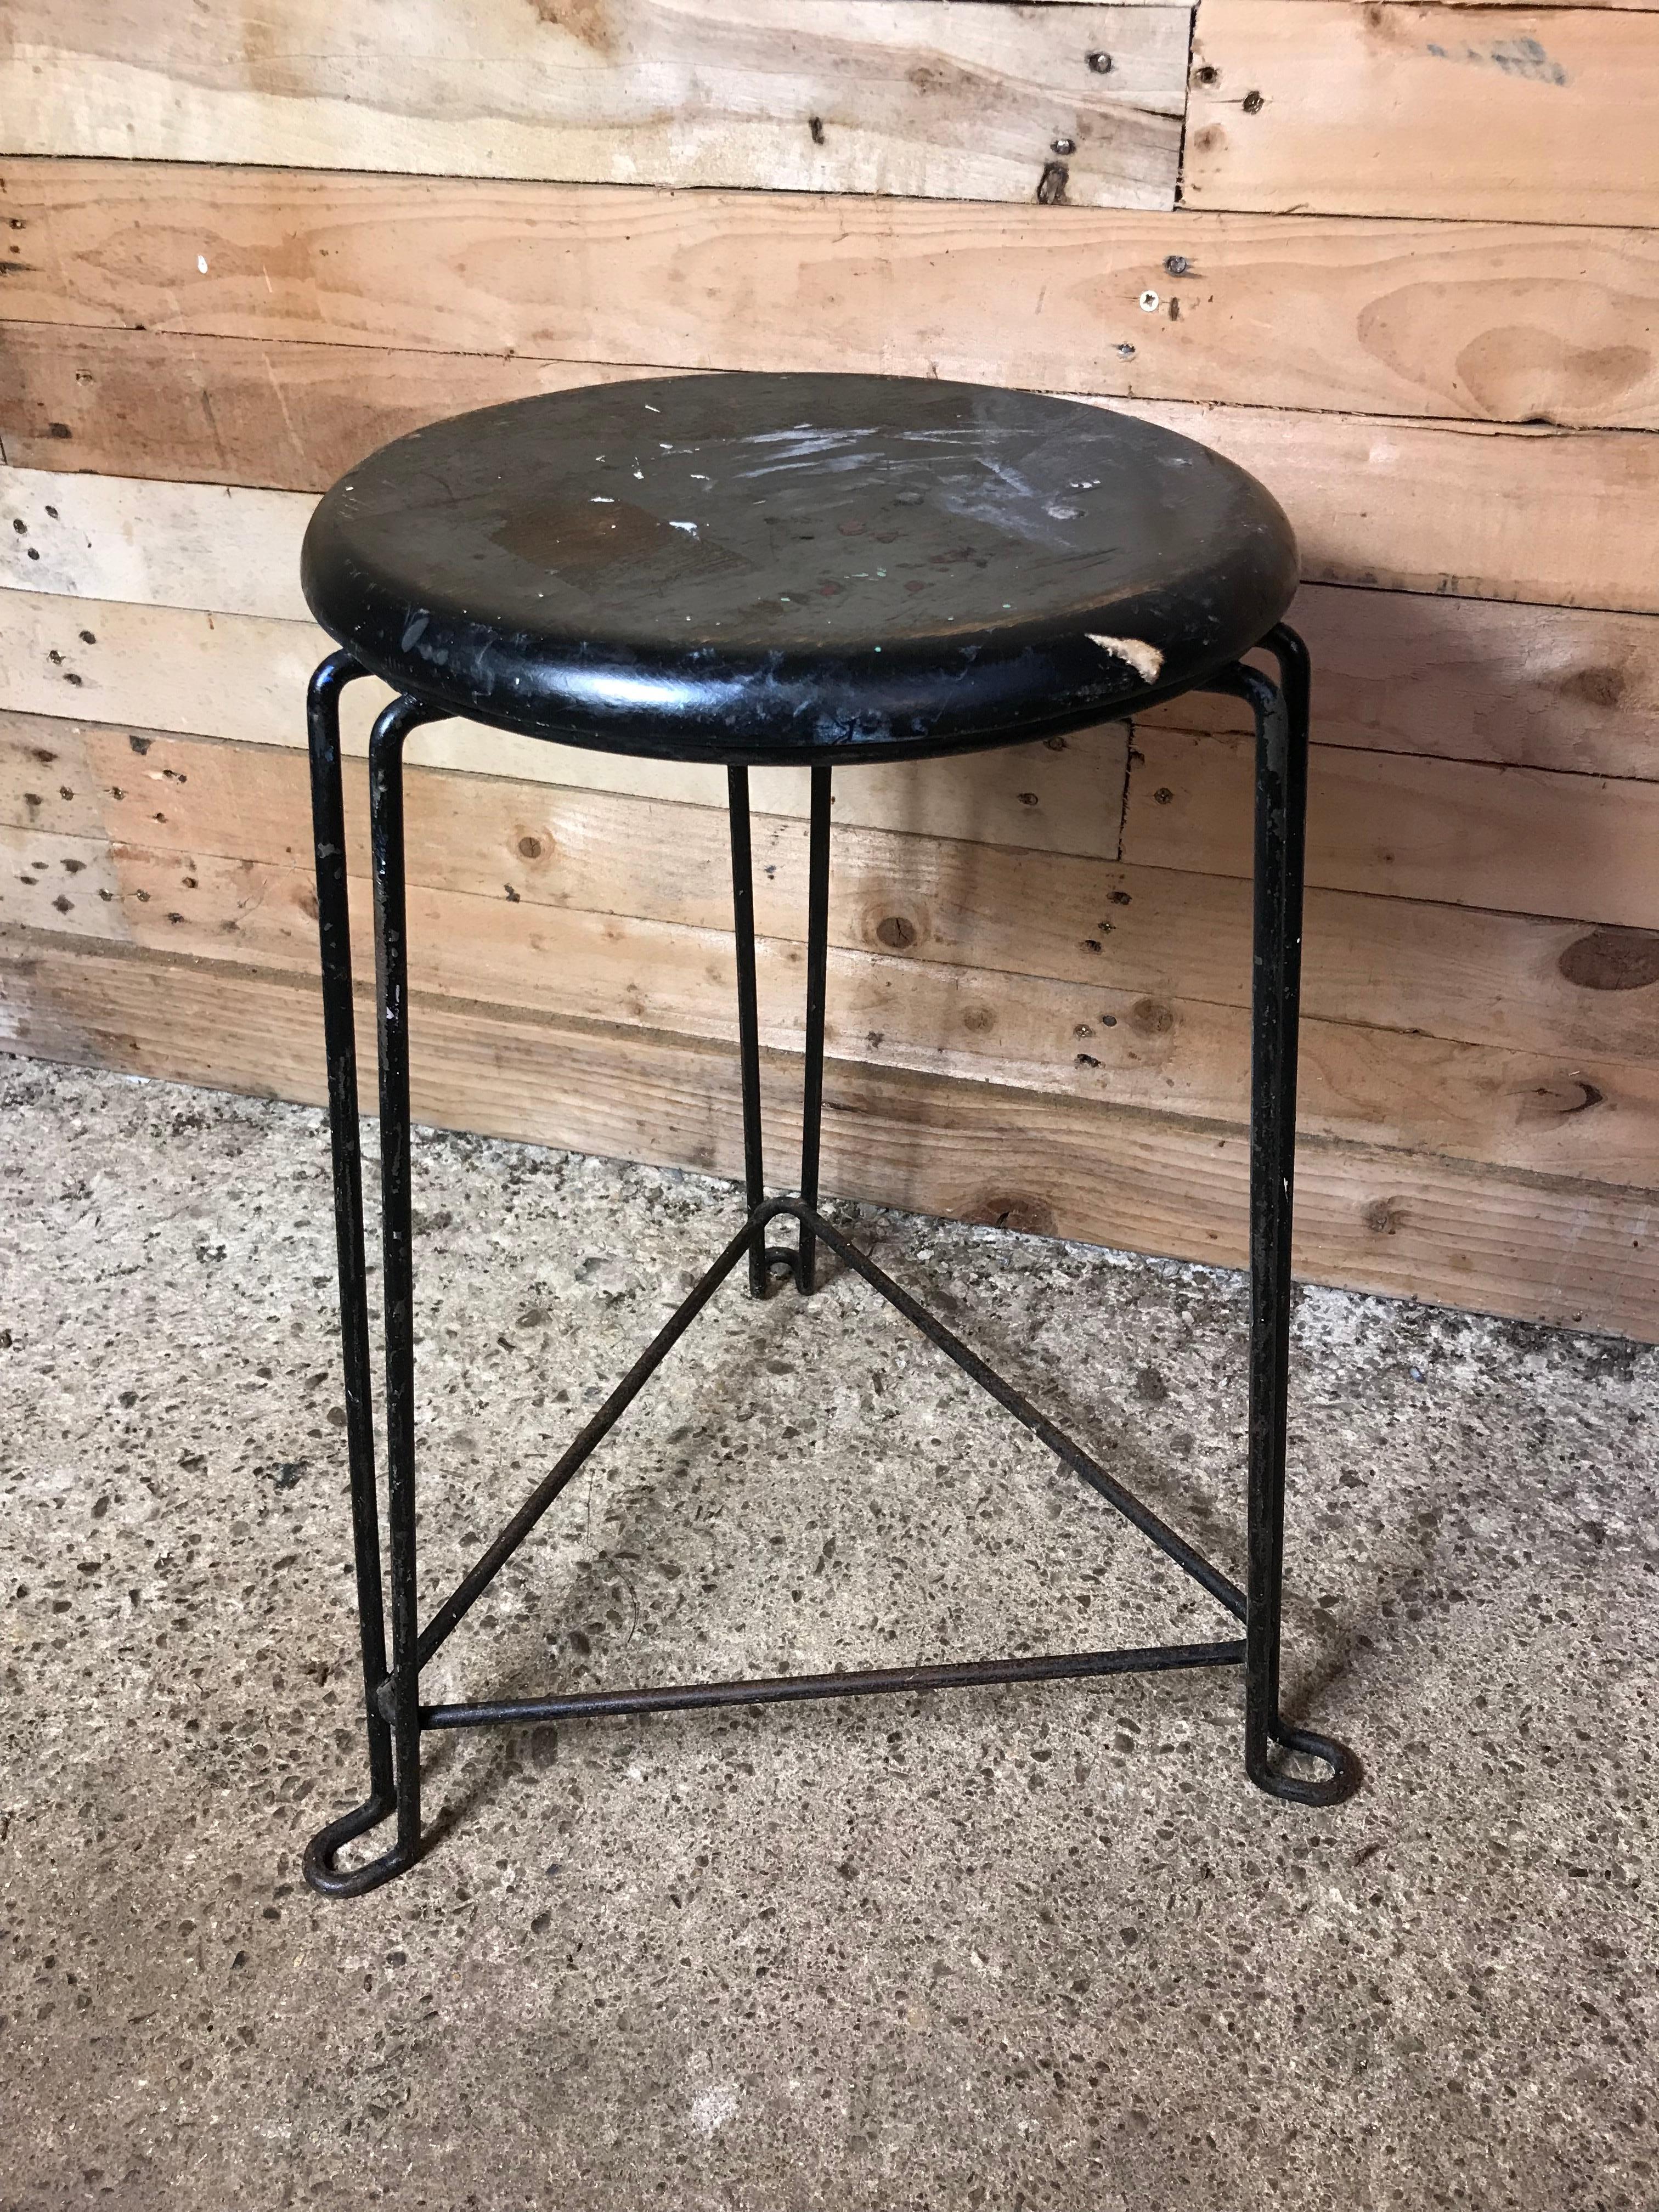 Mid-Century Modern Retro 1960s Wooden Seat with Metal Frame Tomado Stool 'Black Seat' For Sale